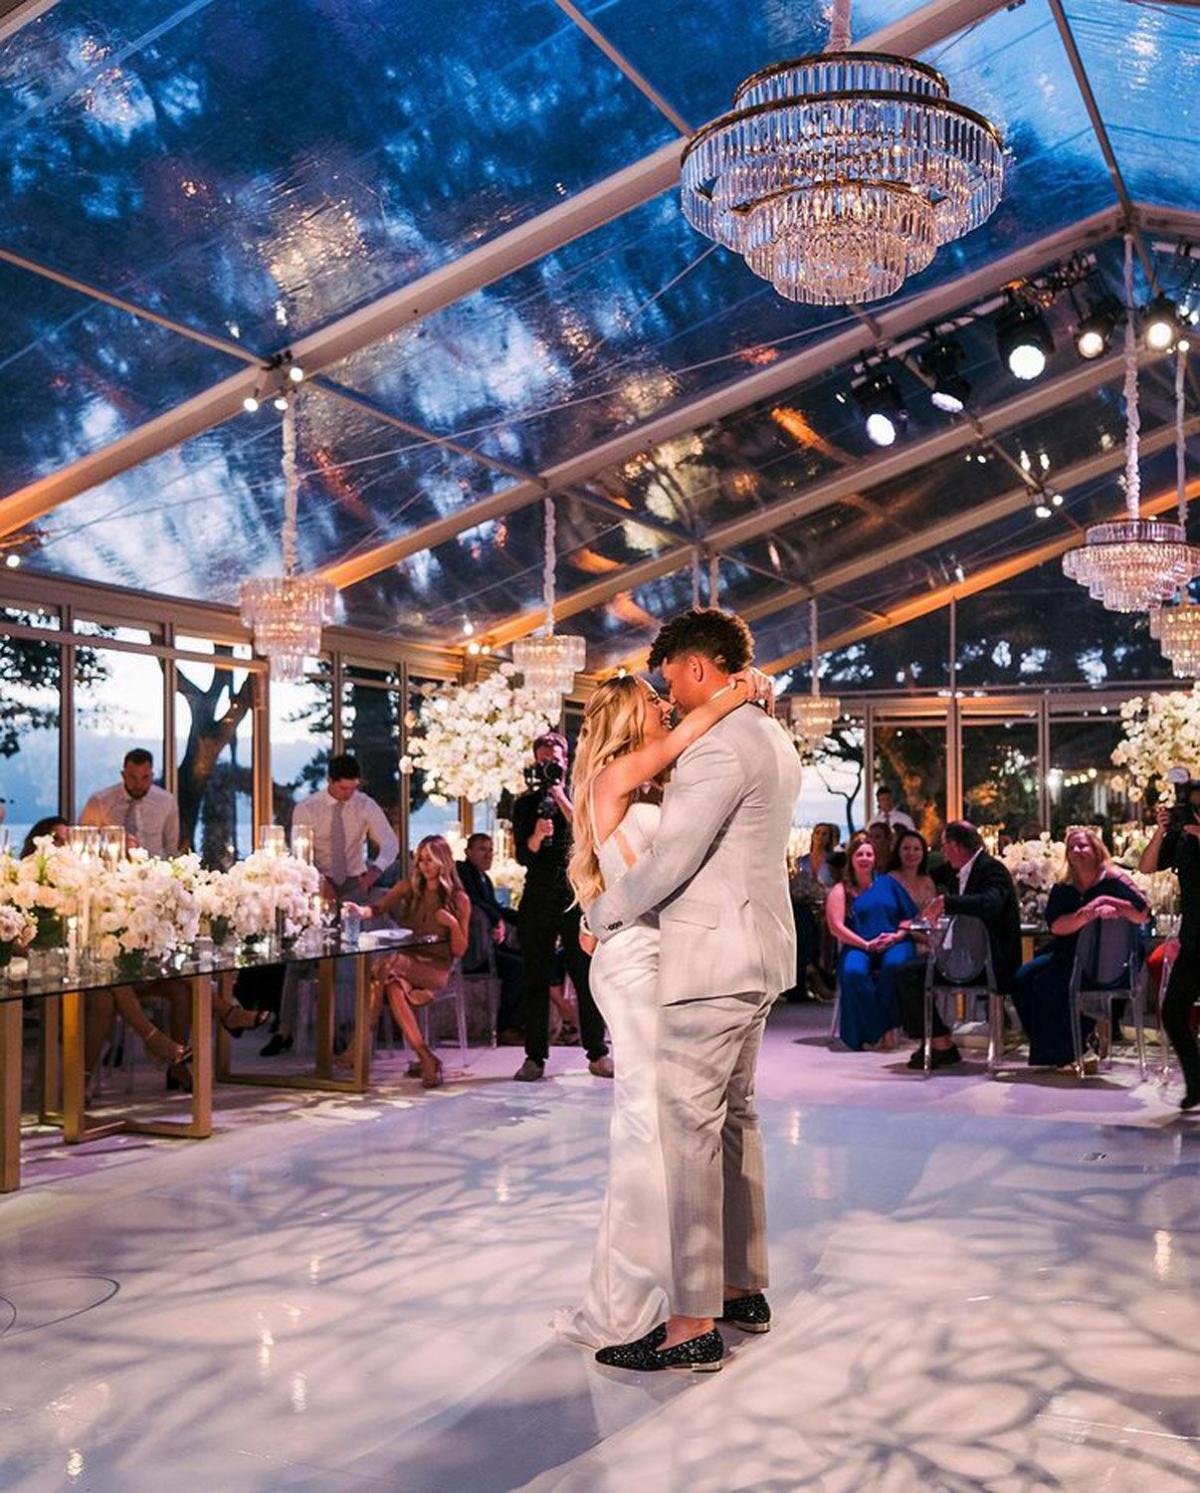 Brittany Matthews Shares New Photos from Wedding to Patrick Mahomes: 'Love  You the Most